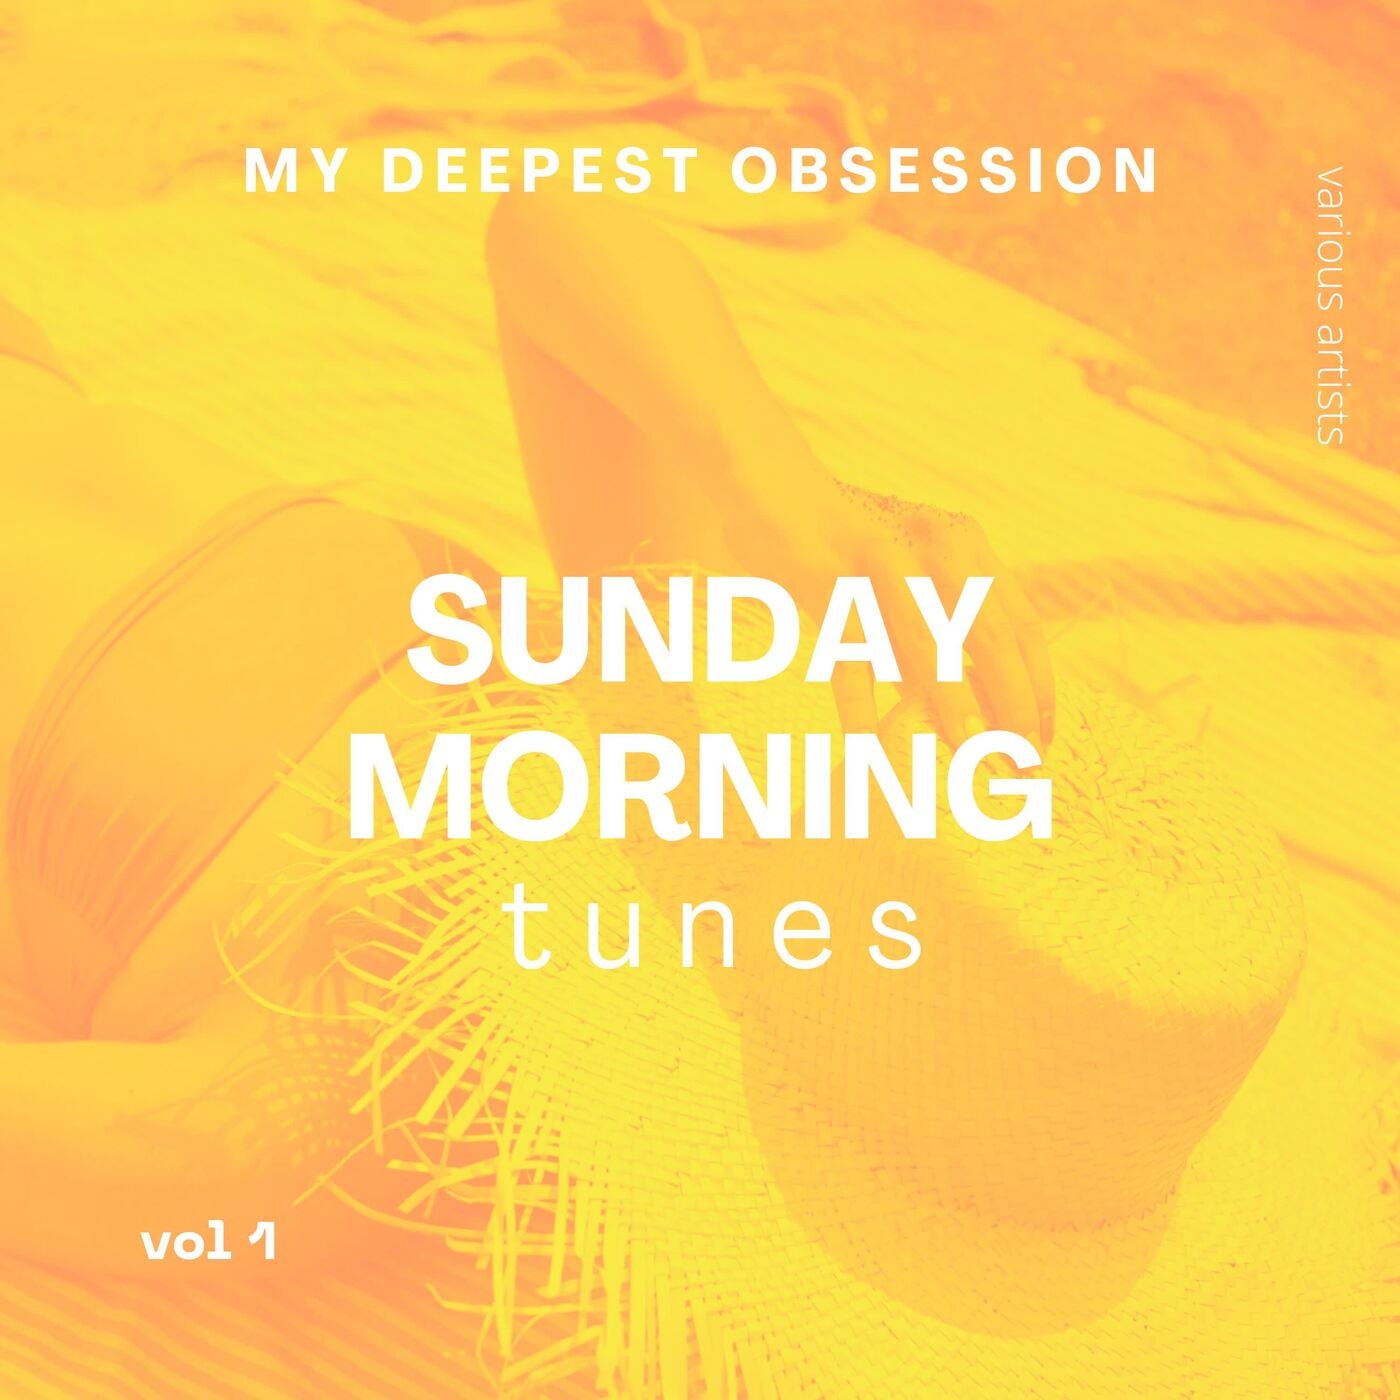 My Deepest Obsession, Vol. 1 (Sunday Morning Tunes)